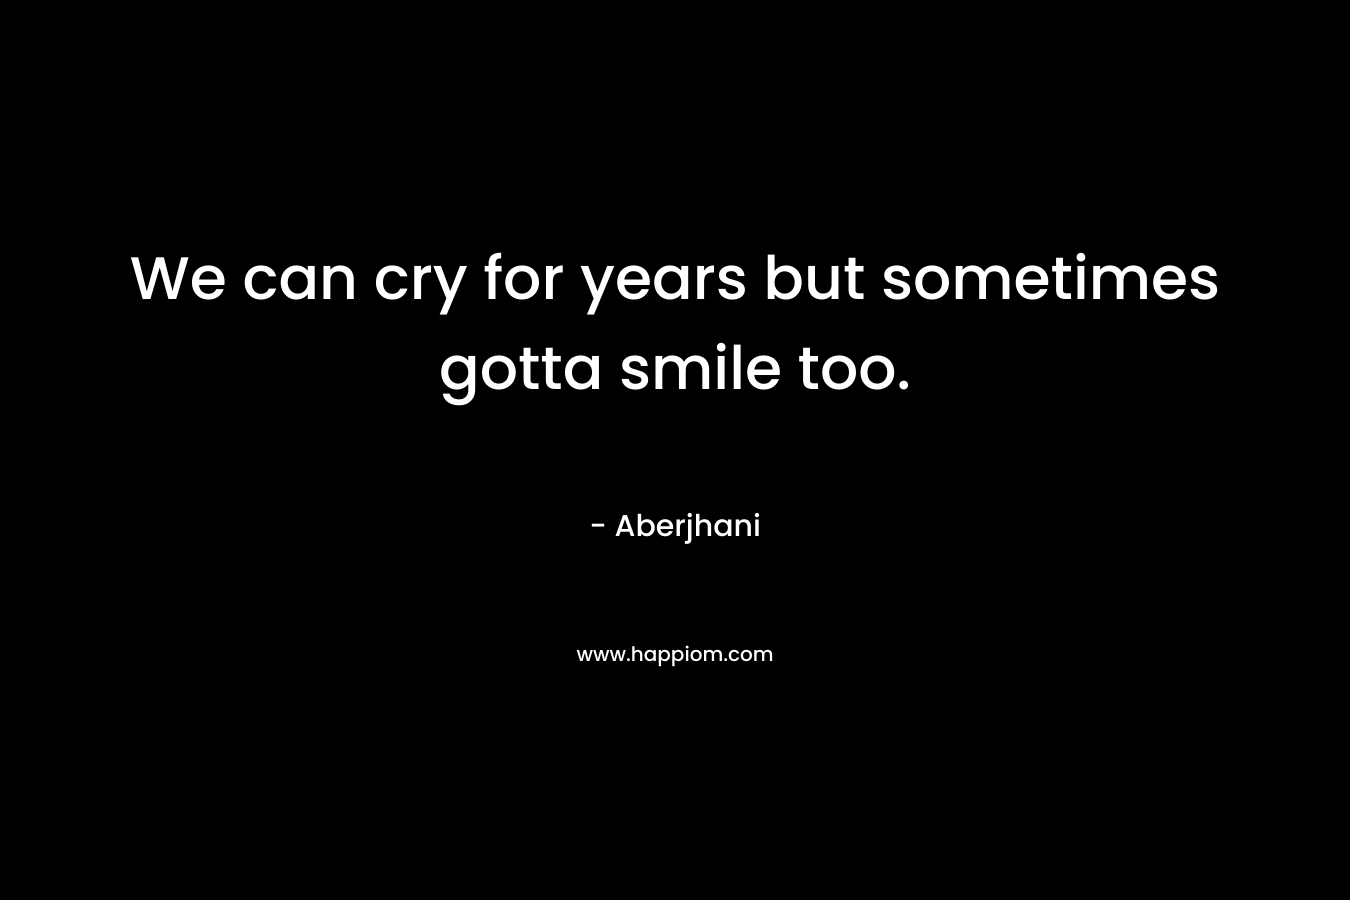 We can cry for years but sometimes gotta smile too. – Aberjhani